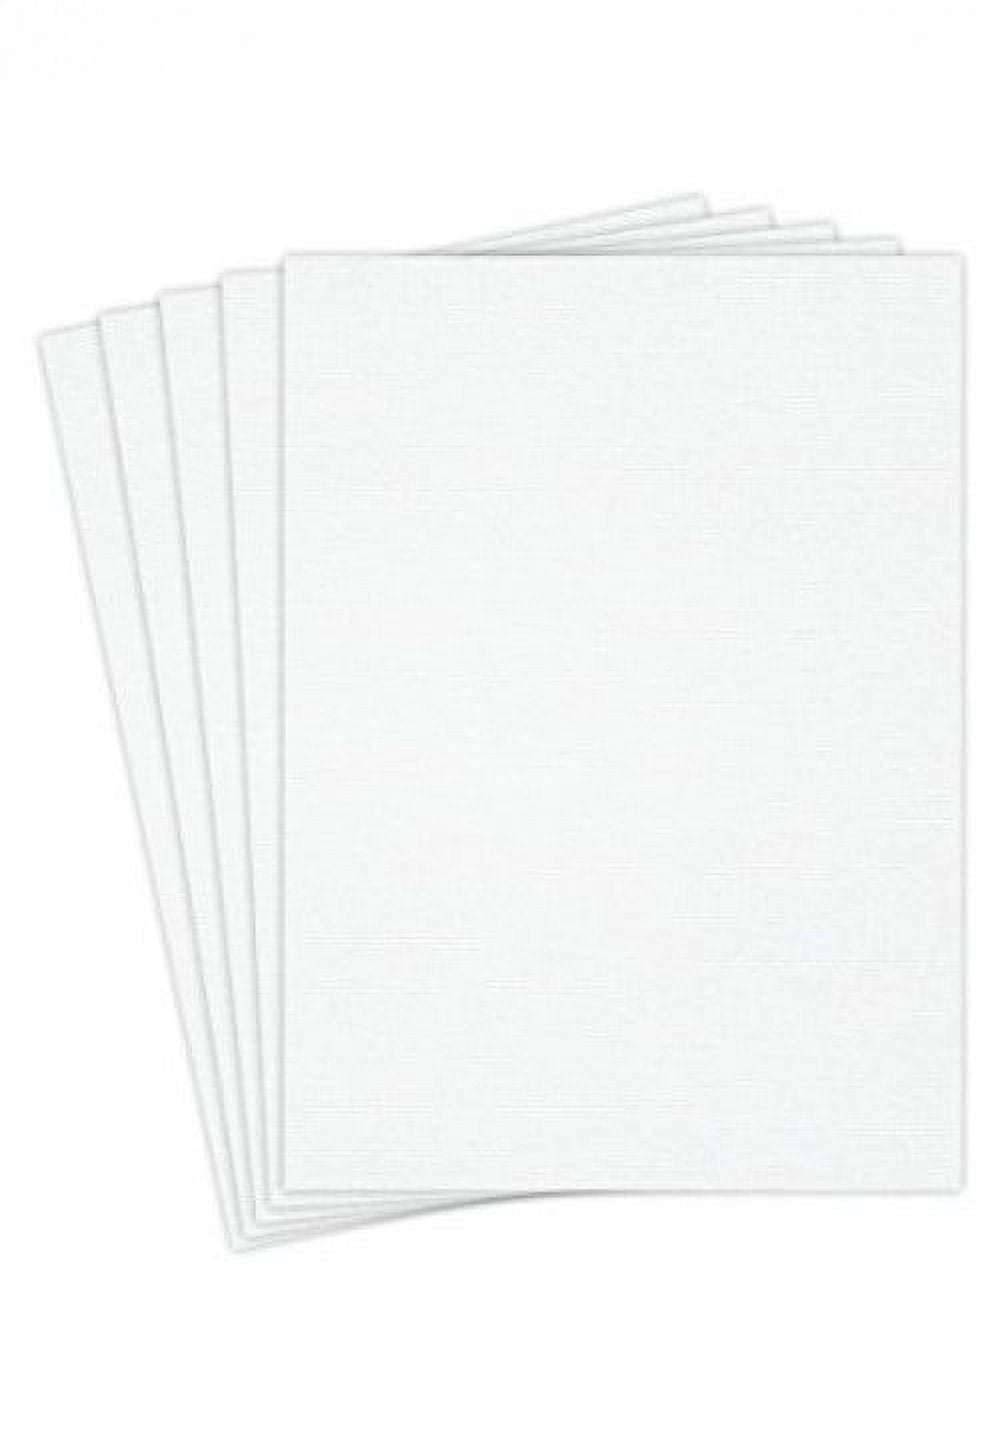  Print-Ready Business Cards (2 x 3-1/4), 10-UP, Perfed for  Separation on 8-1/2 x 11 White 65lb Cover Paper - 250 Sheets (2500 Business  Cards) : Office Products